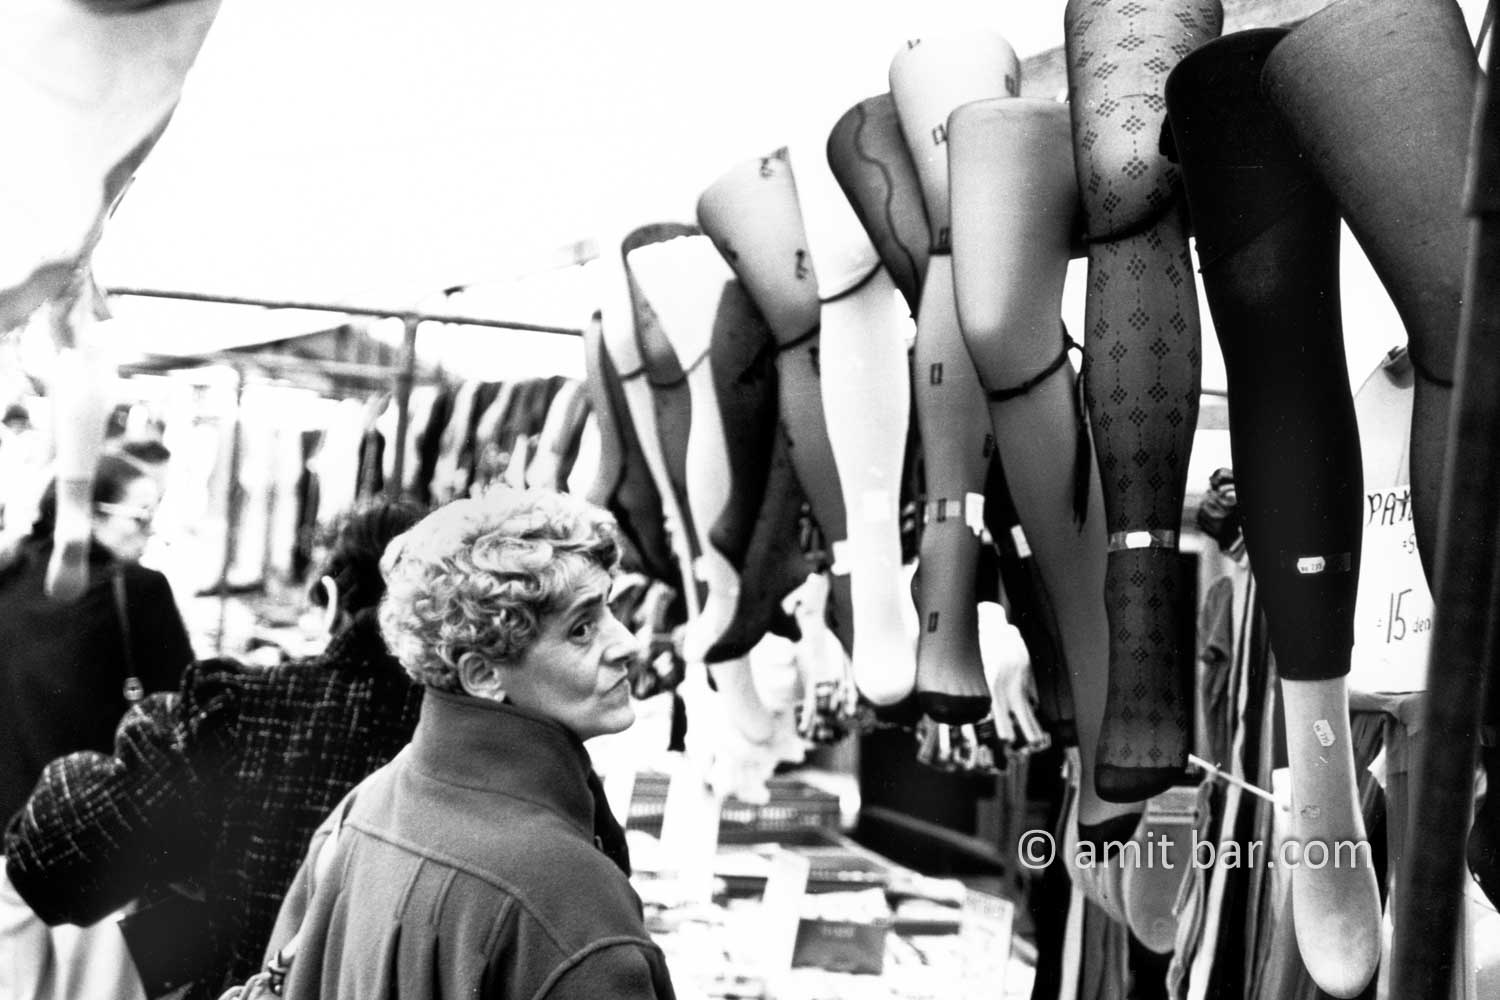 Oh-oh: A woman  is inspecting leggings on the open-air market in Doetinchem, The Netherlands